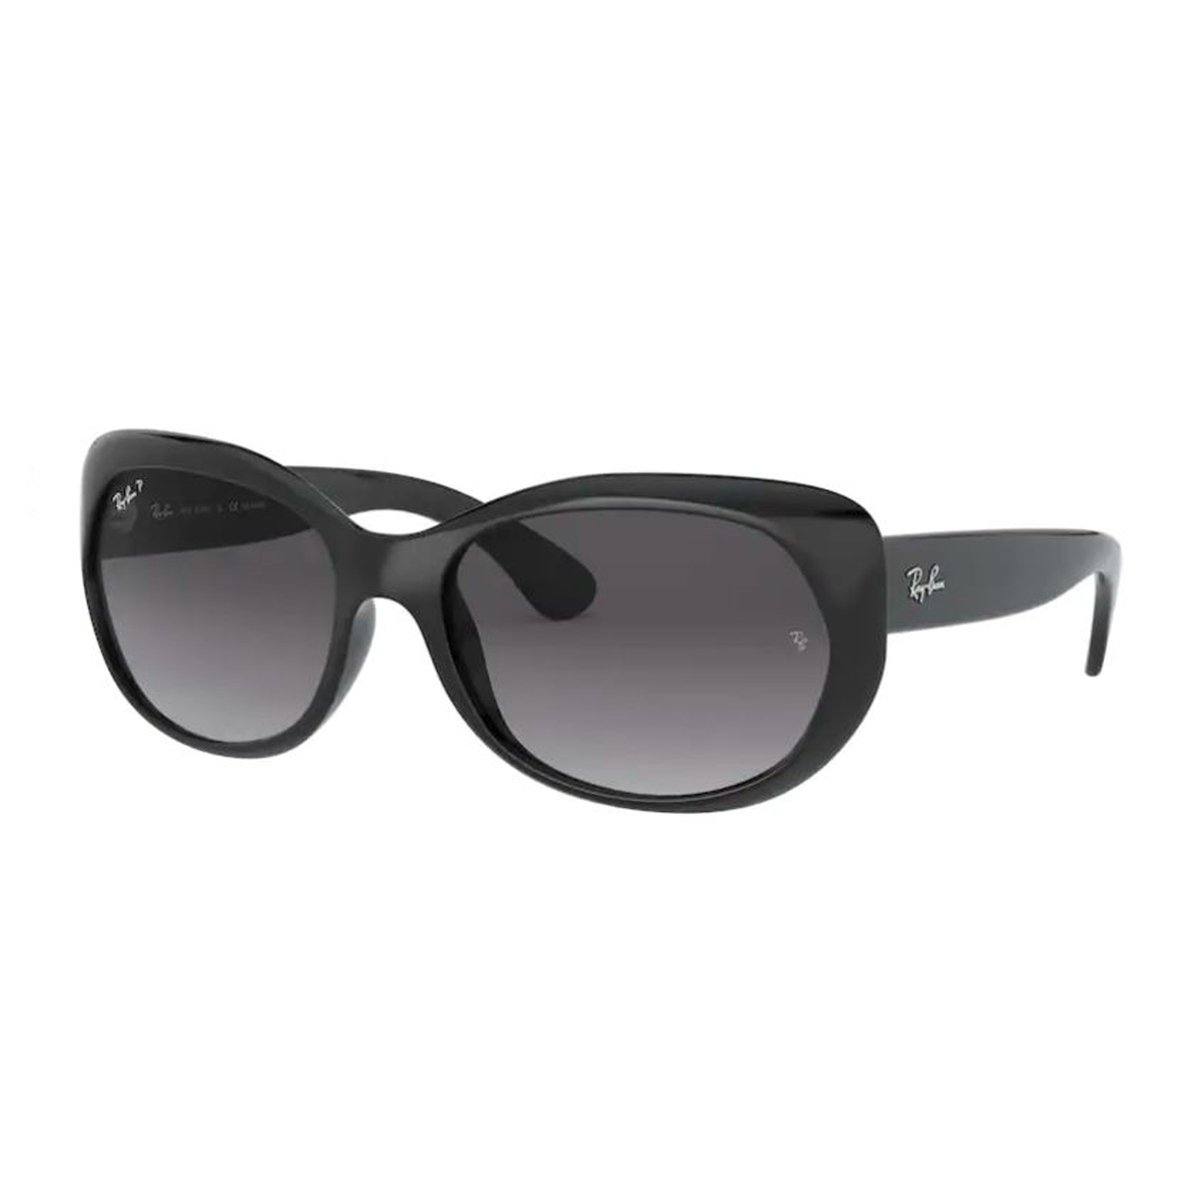 Ray Ban Women's Sunglass Square 0RB4325-601/T3